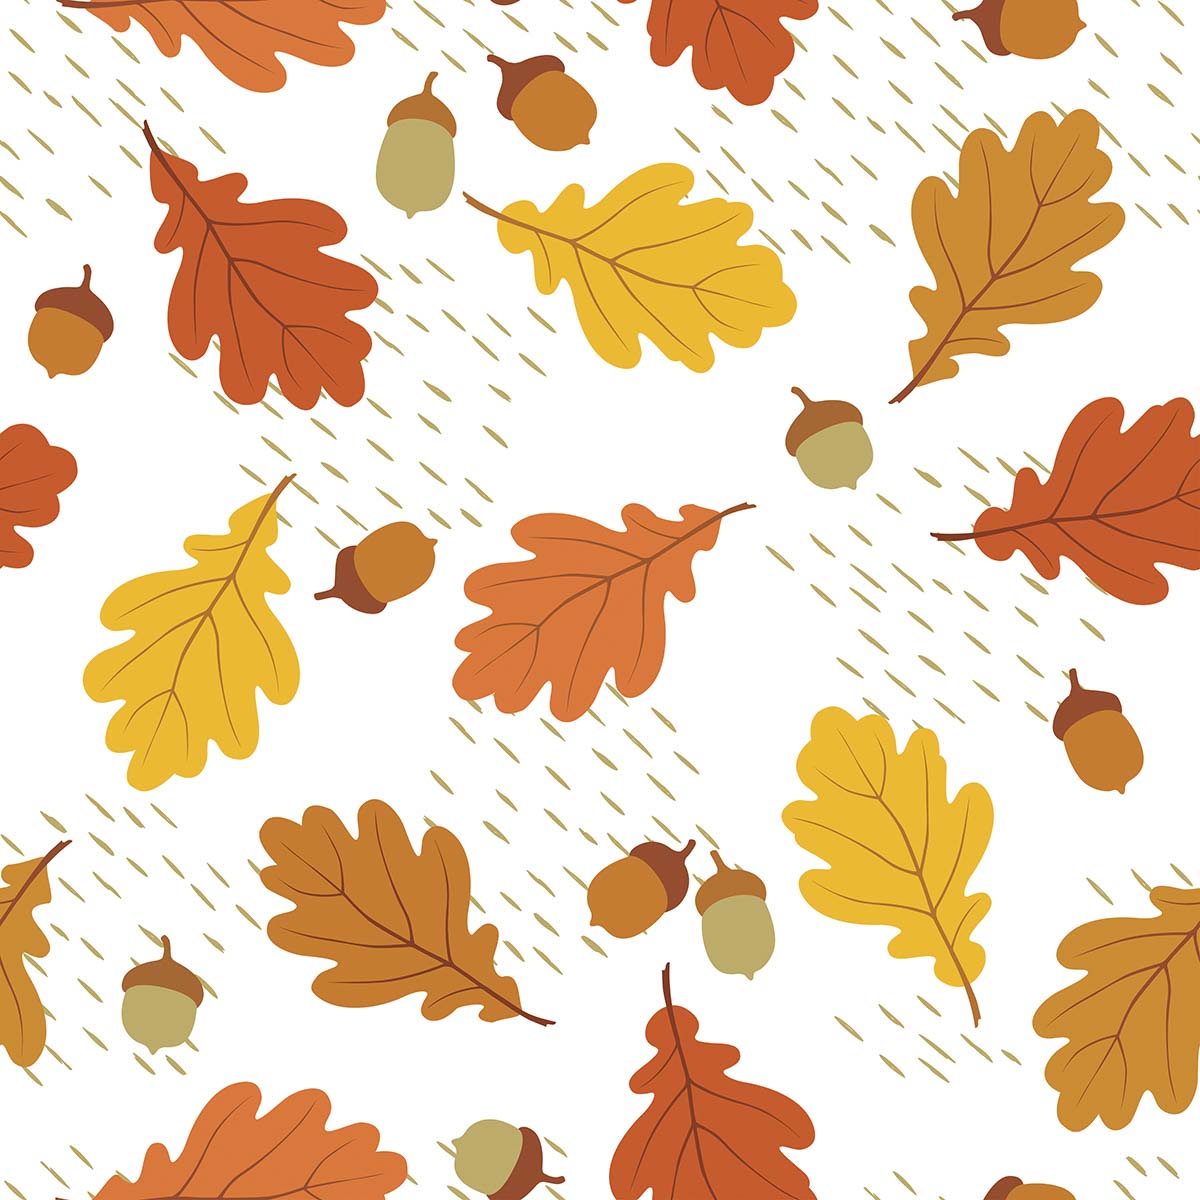 A pattern of leaves and acorns